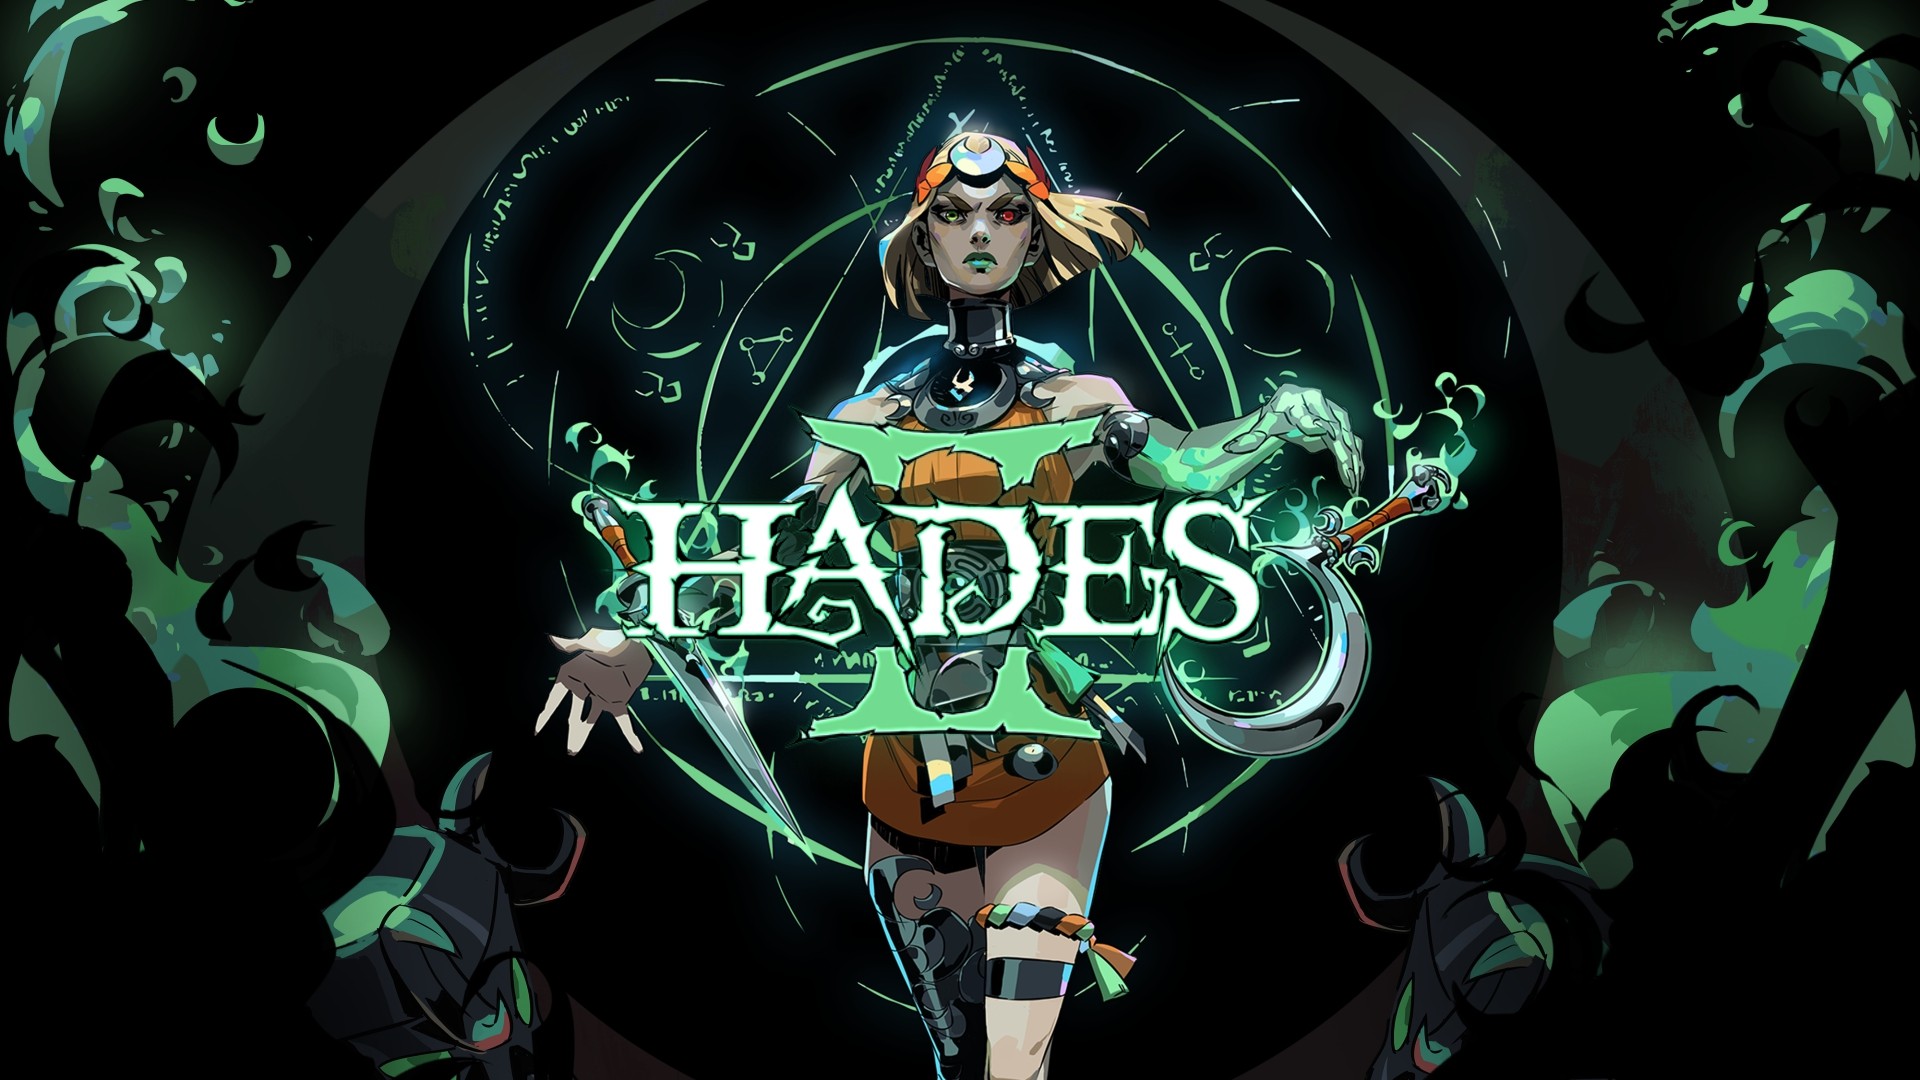 Interview: HADES could come to Nintendo Switch in the future